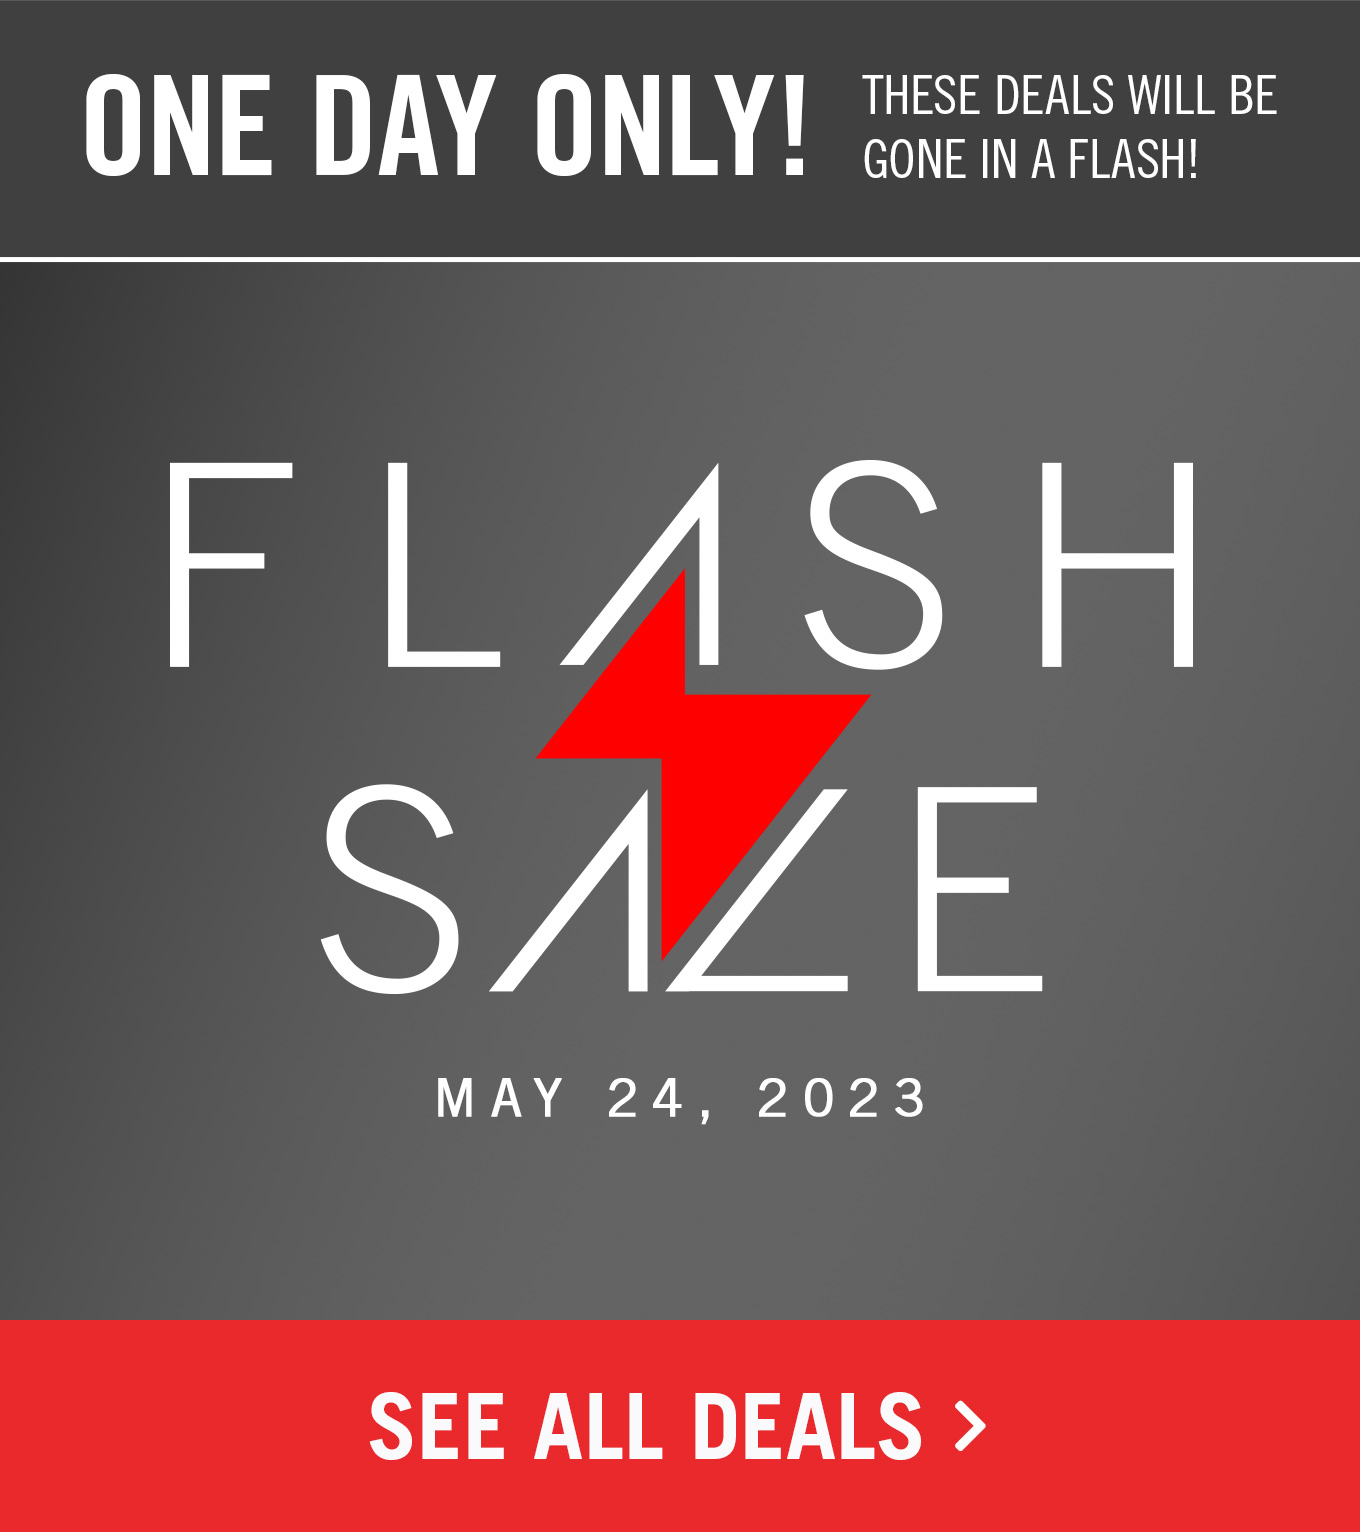 Flash Sale May 24! One day only! See all deals.